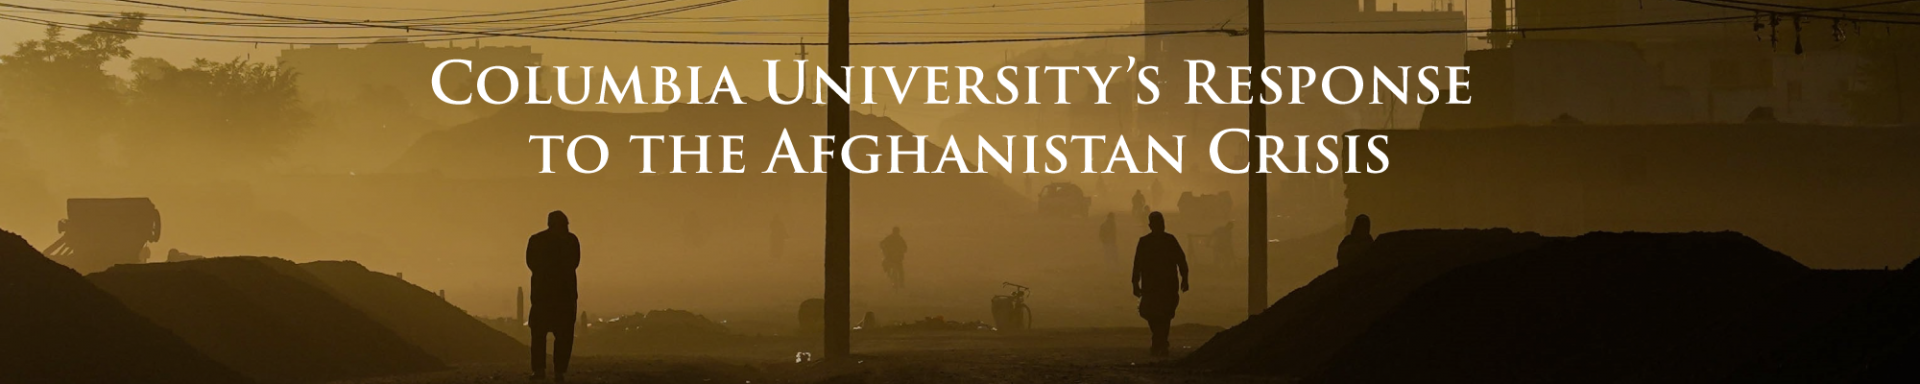 Columbia University’s Response to the Afghanistan Crisis